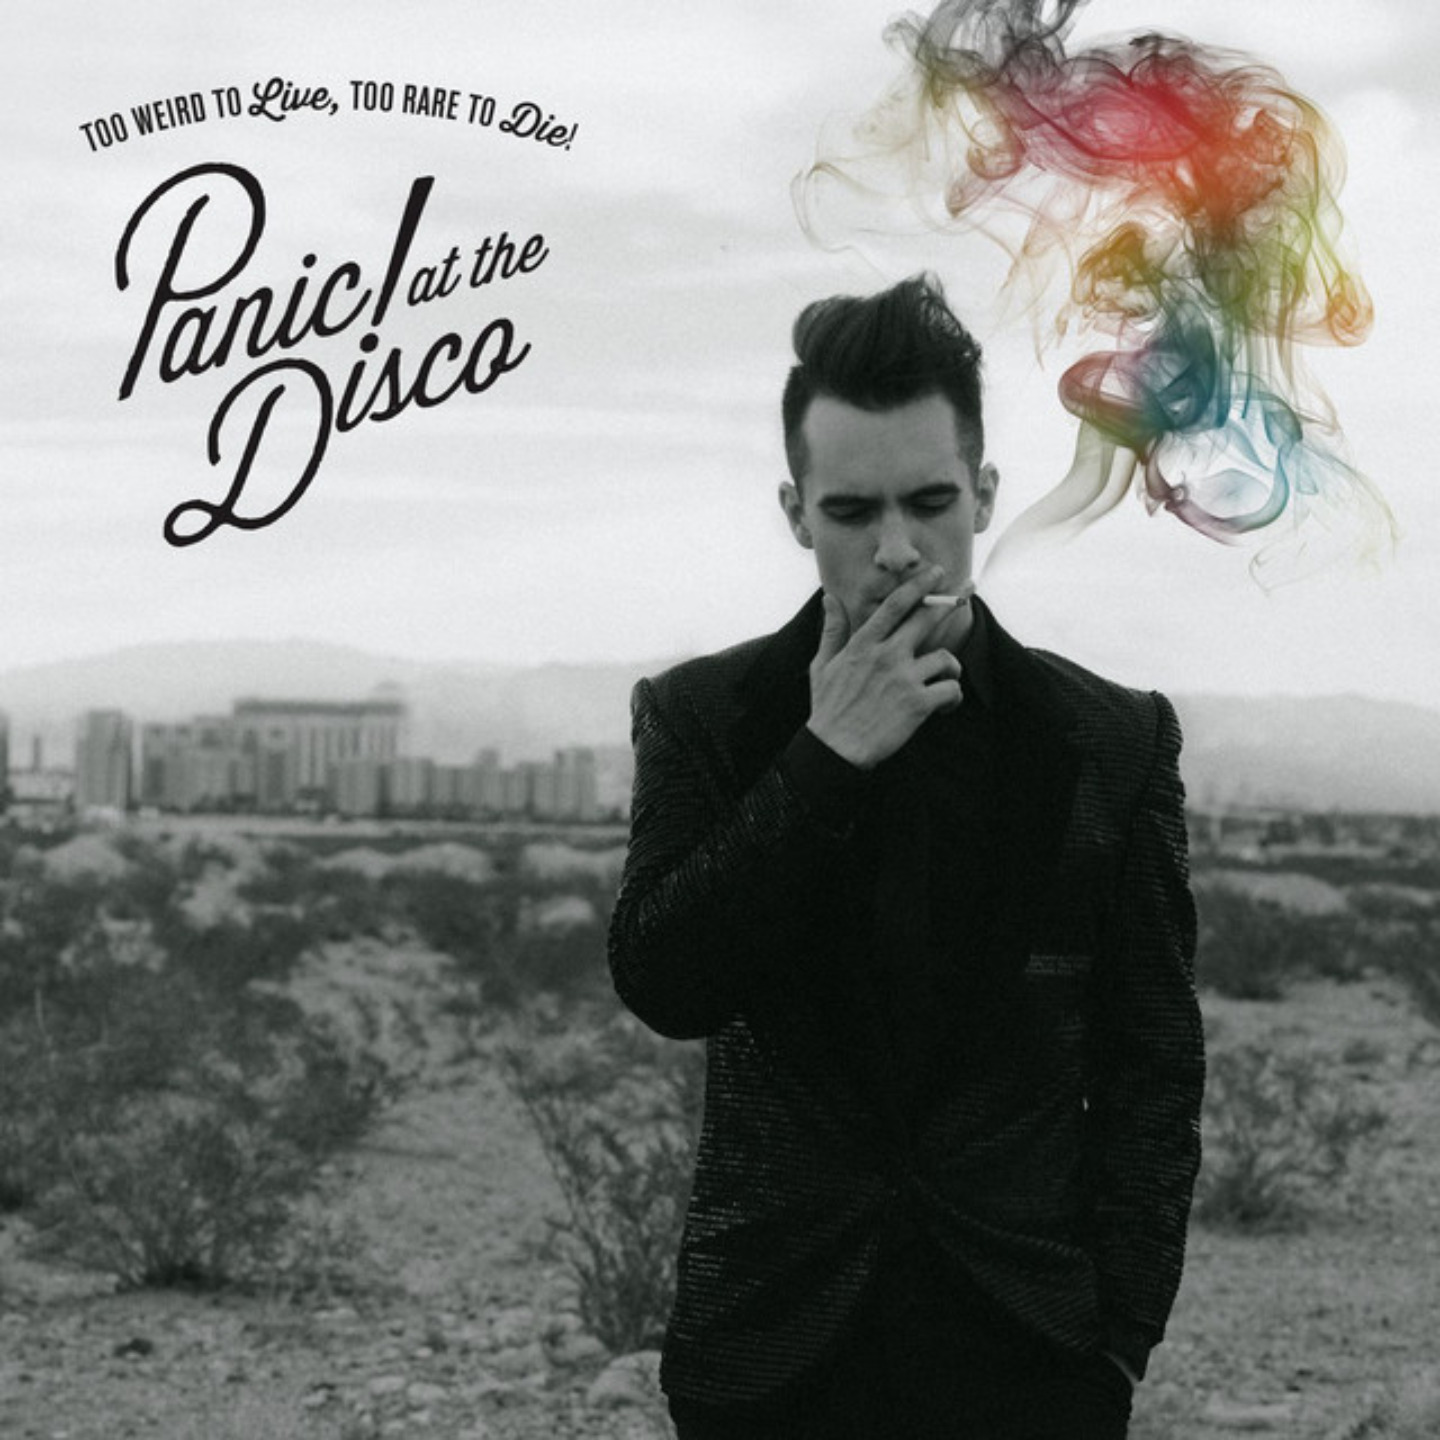 PANIC! AT THE DISCO - Too Weird To Live, Too Rare To Die! LP